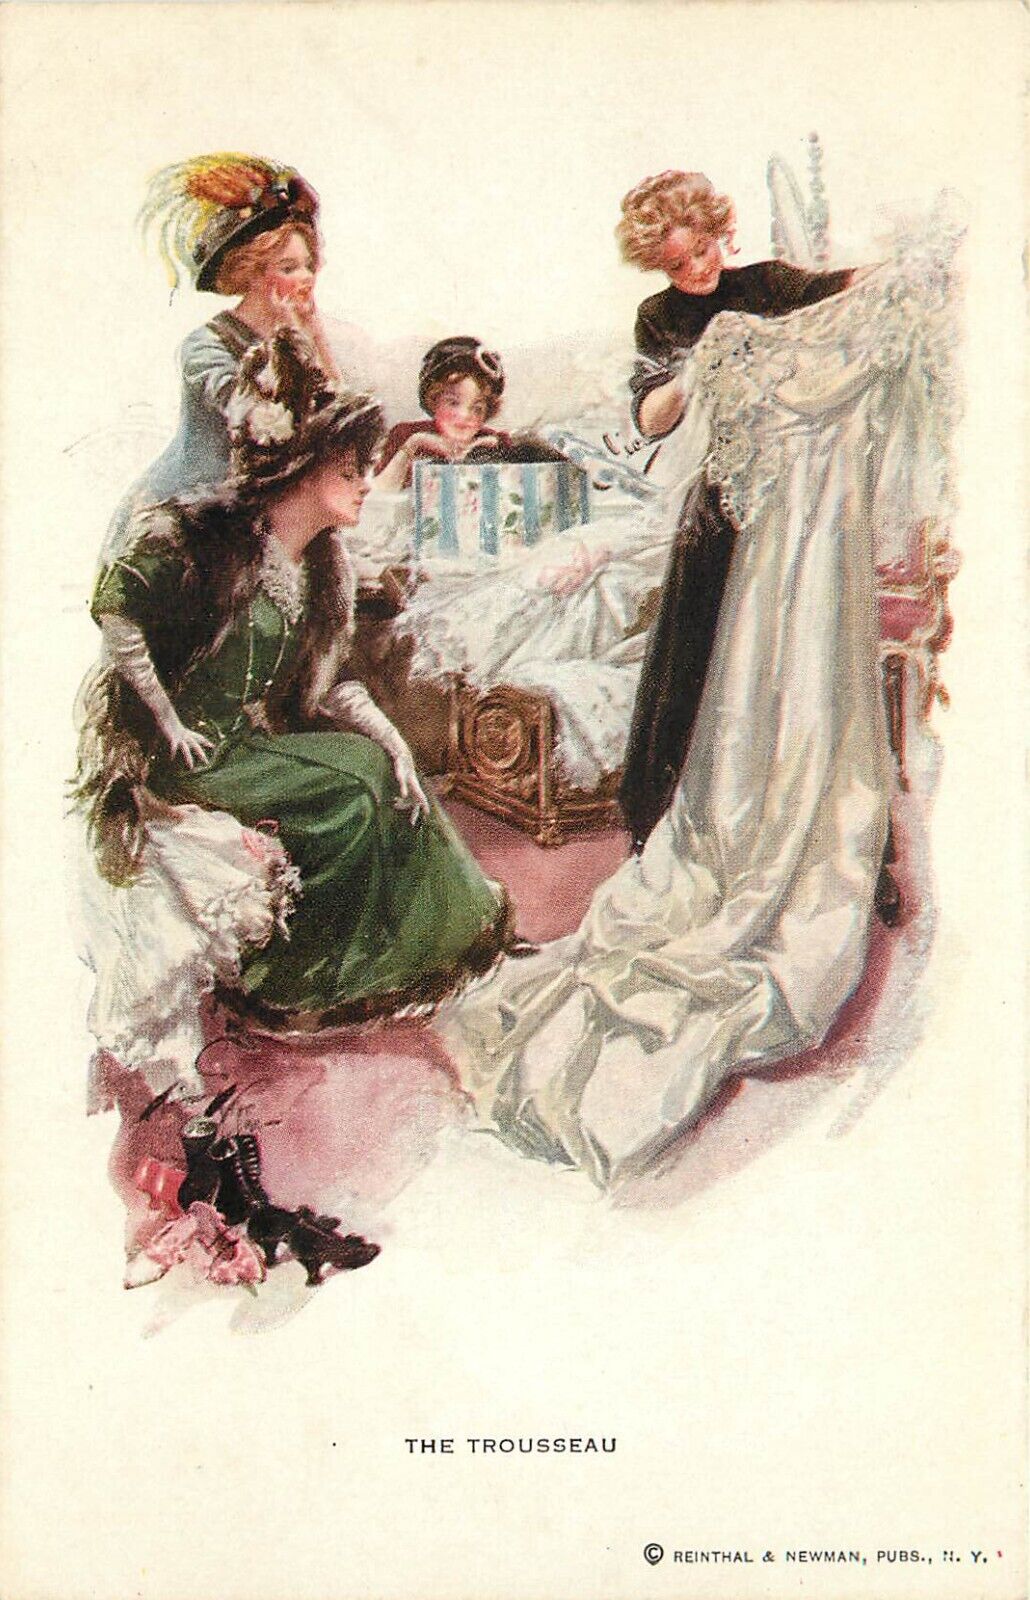 A/S Harrison Fisher Postcard 187. The Wedding Trousseau, Ladies Look at Clothes